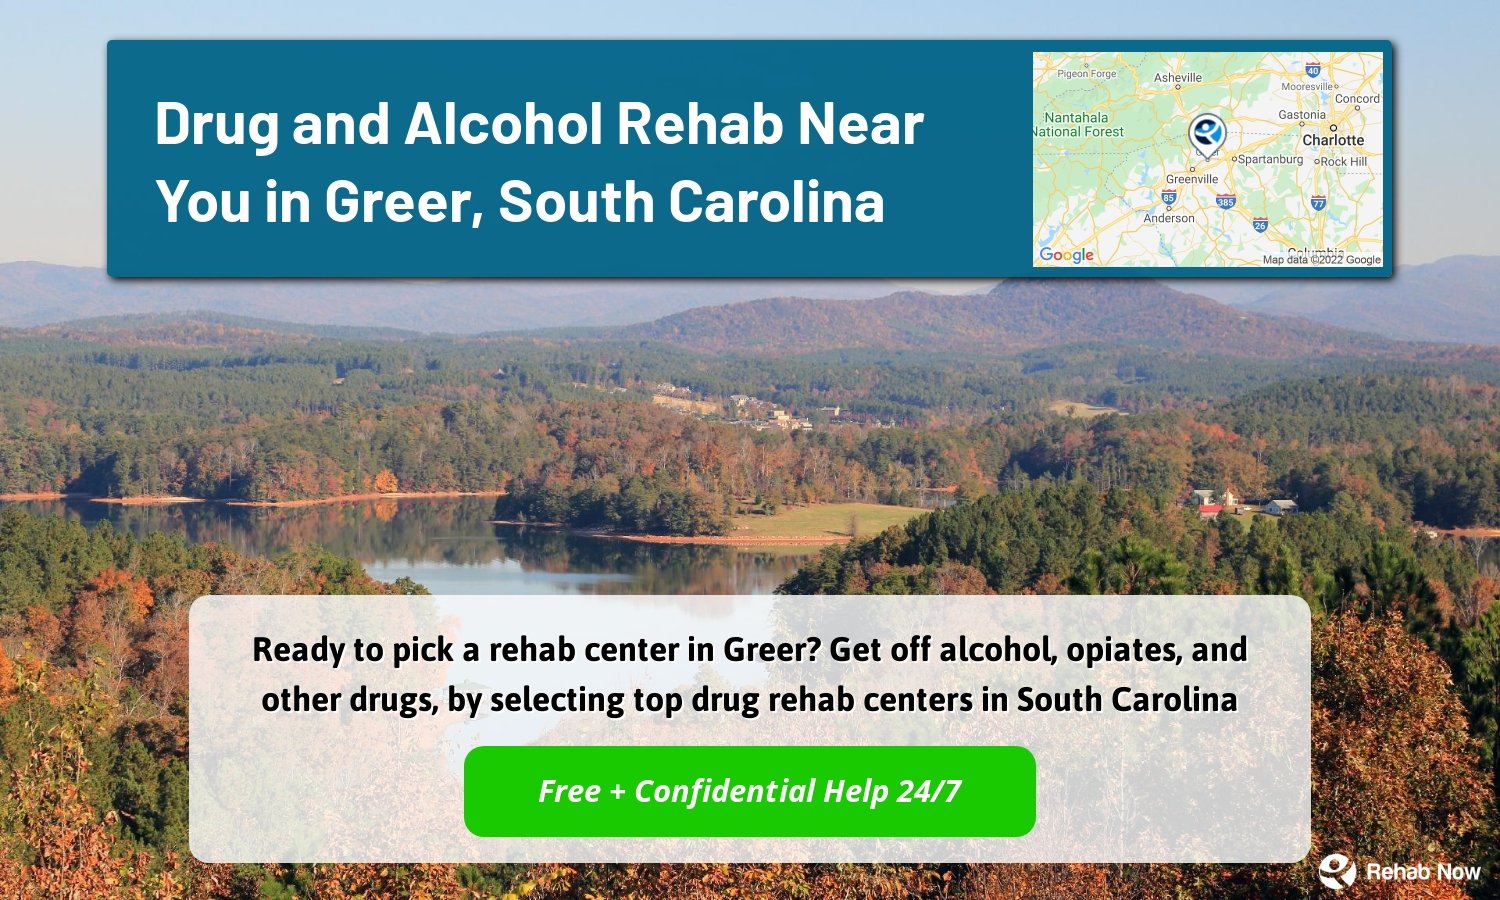 Ready to pick a rehab center in Greer? Get off alcohol, opiates, and other drugs, by selecting top drug rehab centers in South Carolina